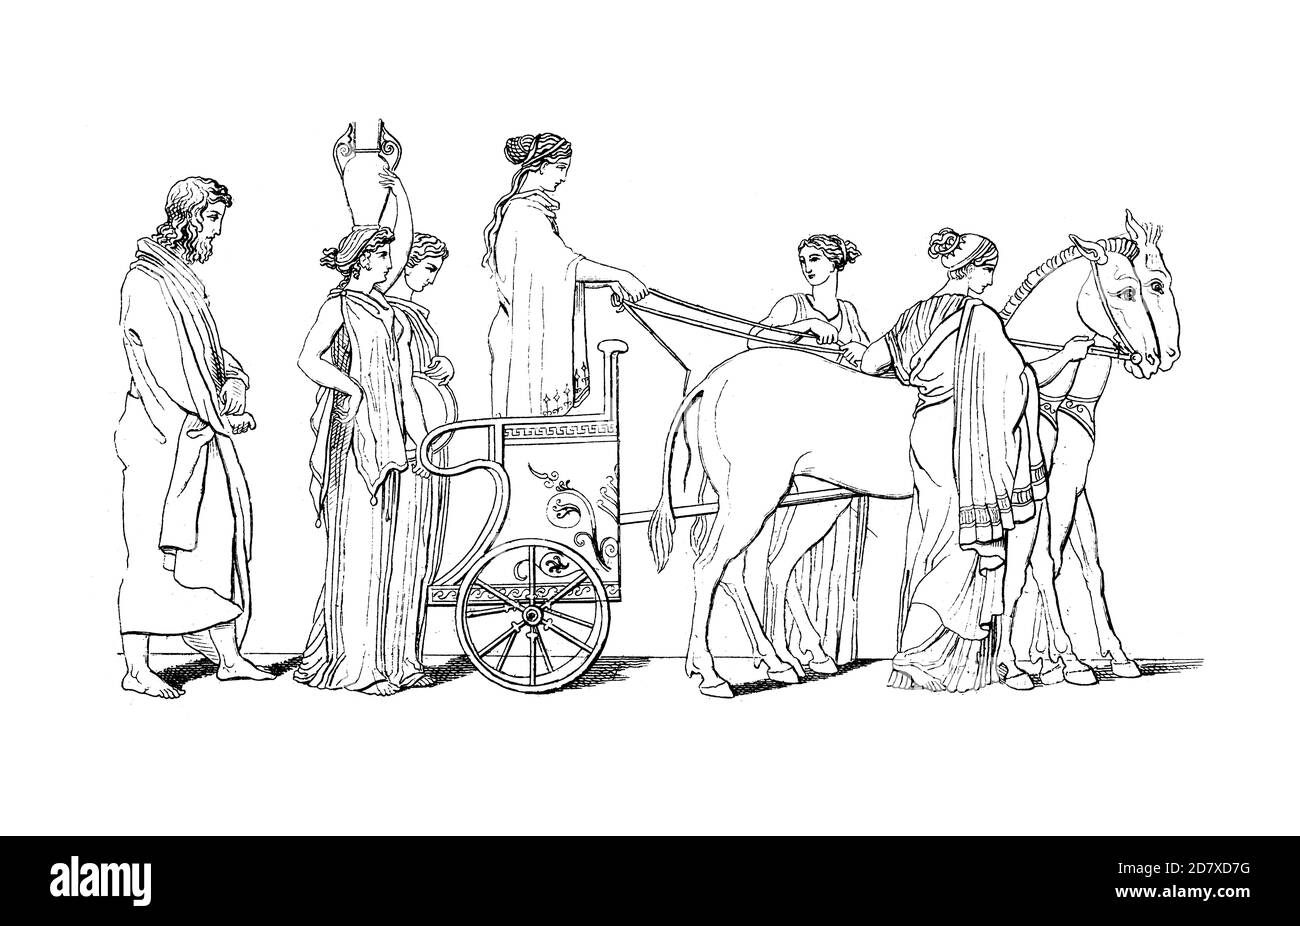 Antique illustration depicting Odysseus follows Nausicaa's Wagon, drawing by John Flaxman. He was born on July 6, 1755 in York, England and died on De Stock Photo